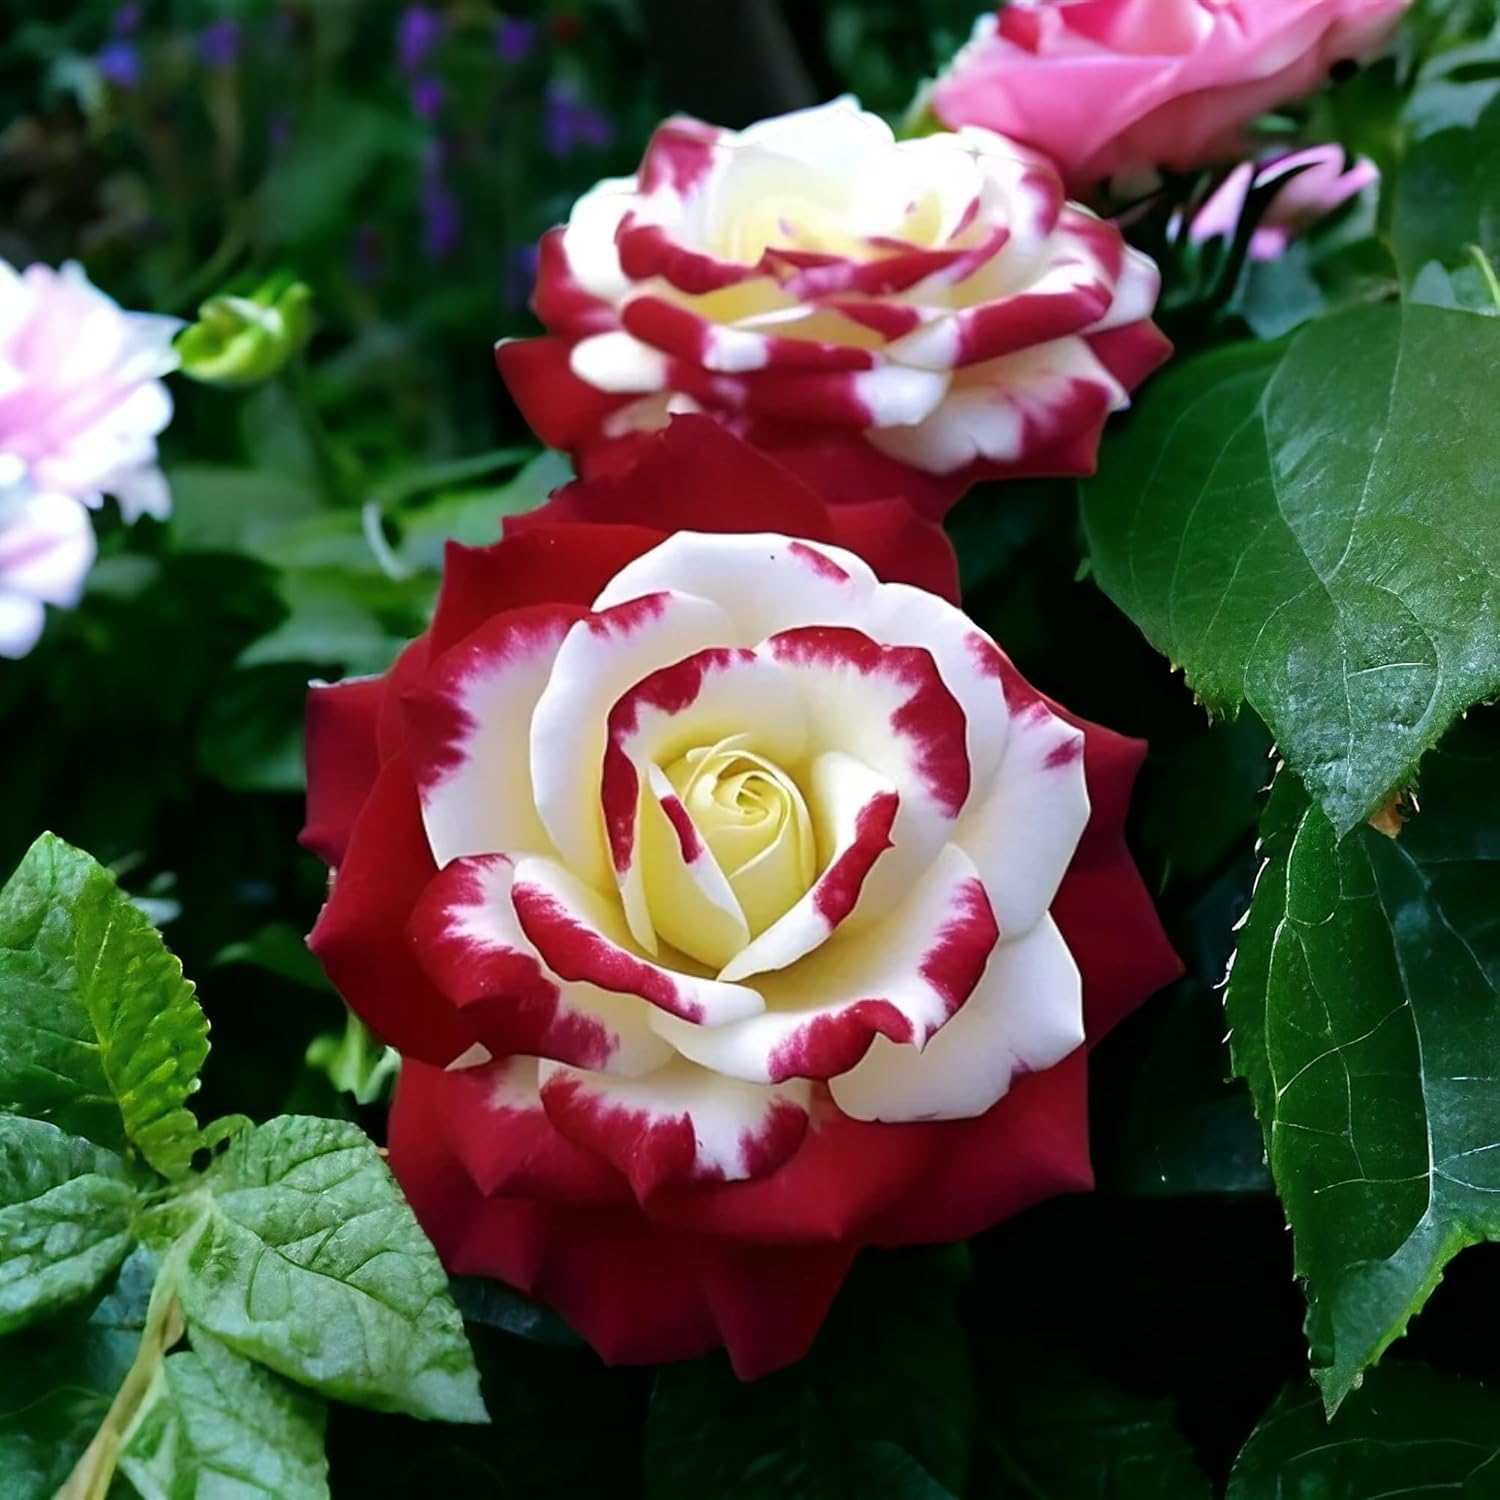 

Rare Twin Red White Rose Seeds For Planting- Heirloom Non-gmo Flower Seeds For Captivating - Perfect For Spring And Fall Planting, Great Gardening Gift